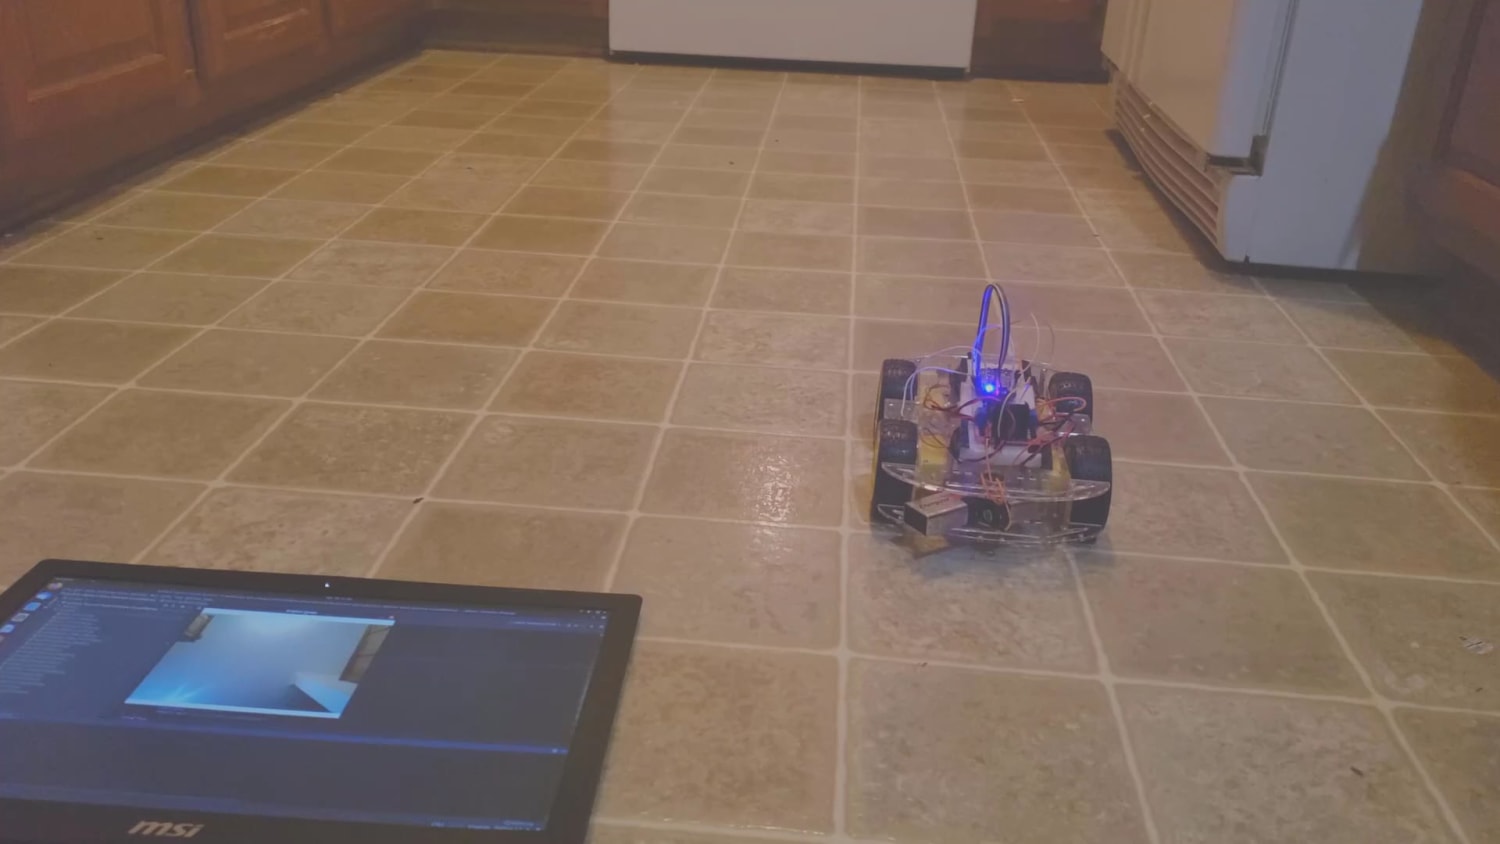 Not so much of a shitty robot, but hope you guys like my Arduino RC car controlled with Python, CNN, OpenCV - Rock, Paper, Scissors Hand Gestures!!